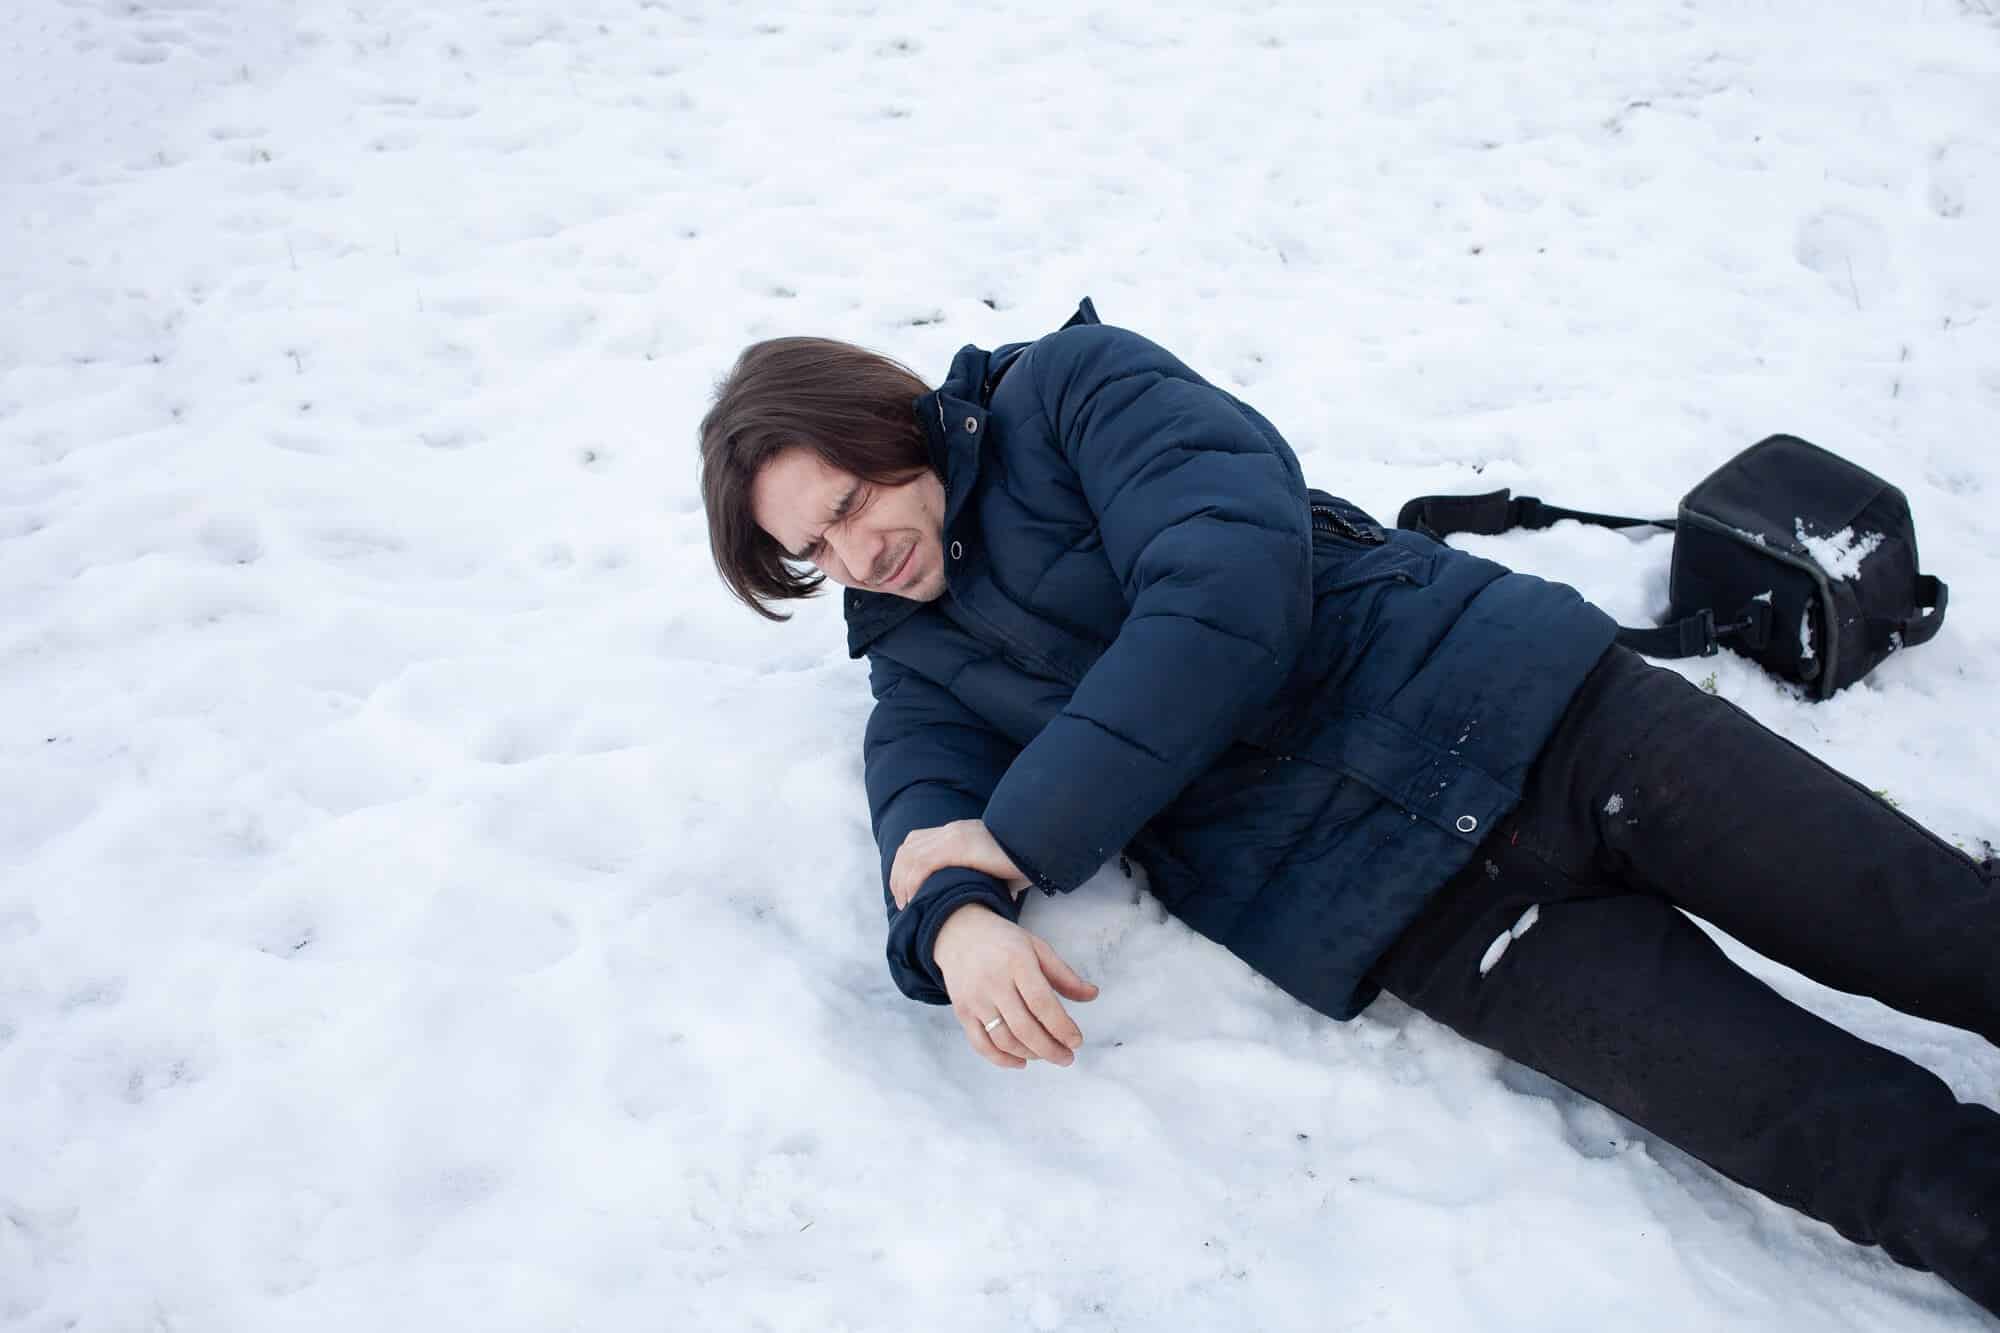 Man fallen on ice, laying down in pain -Slip and Fall Accidents